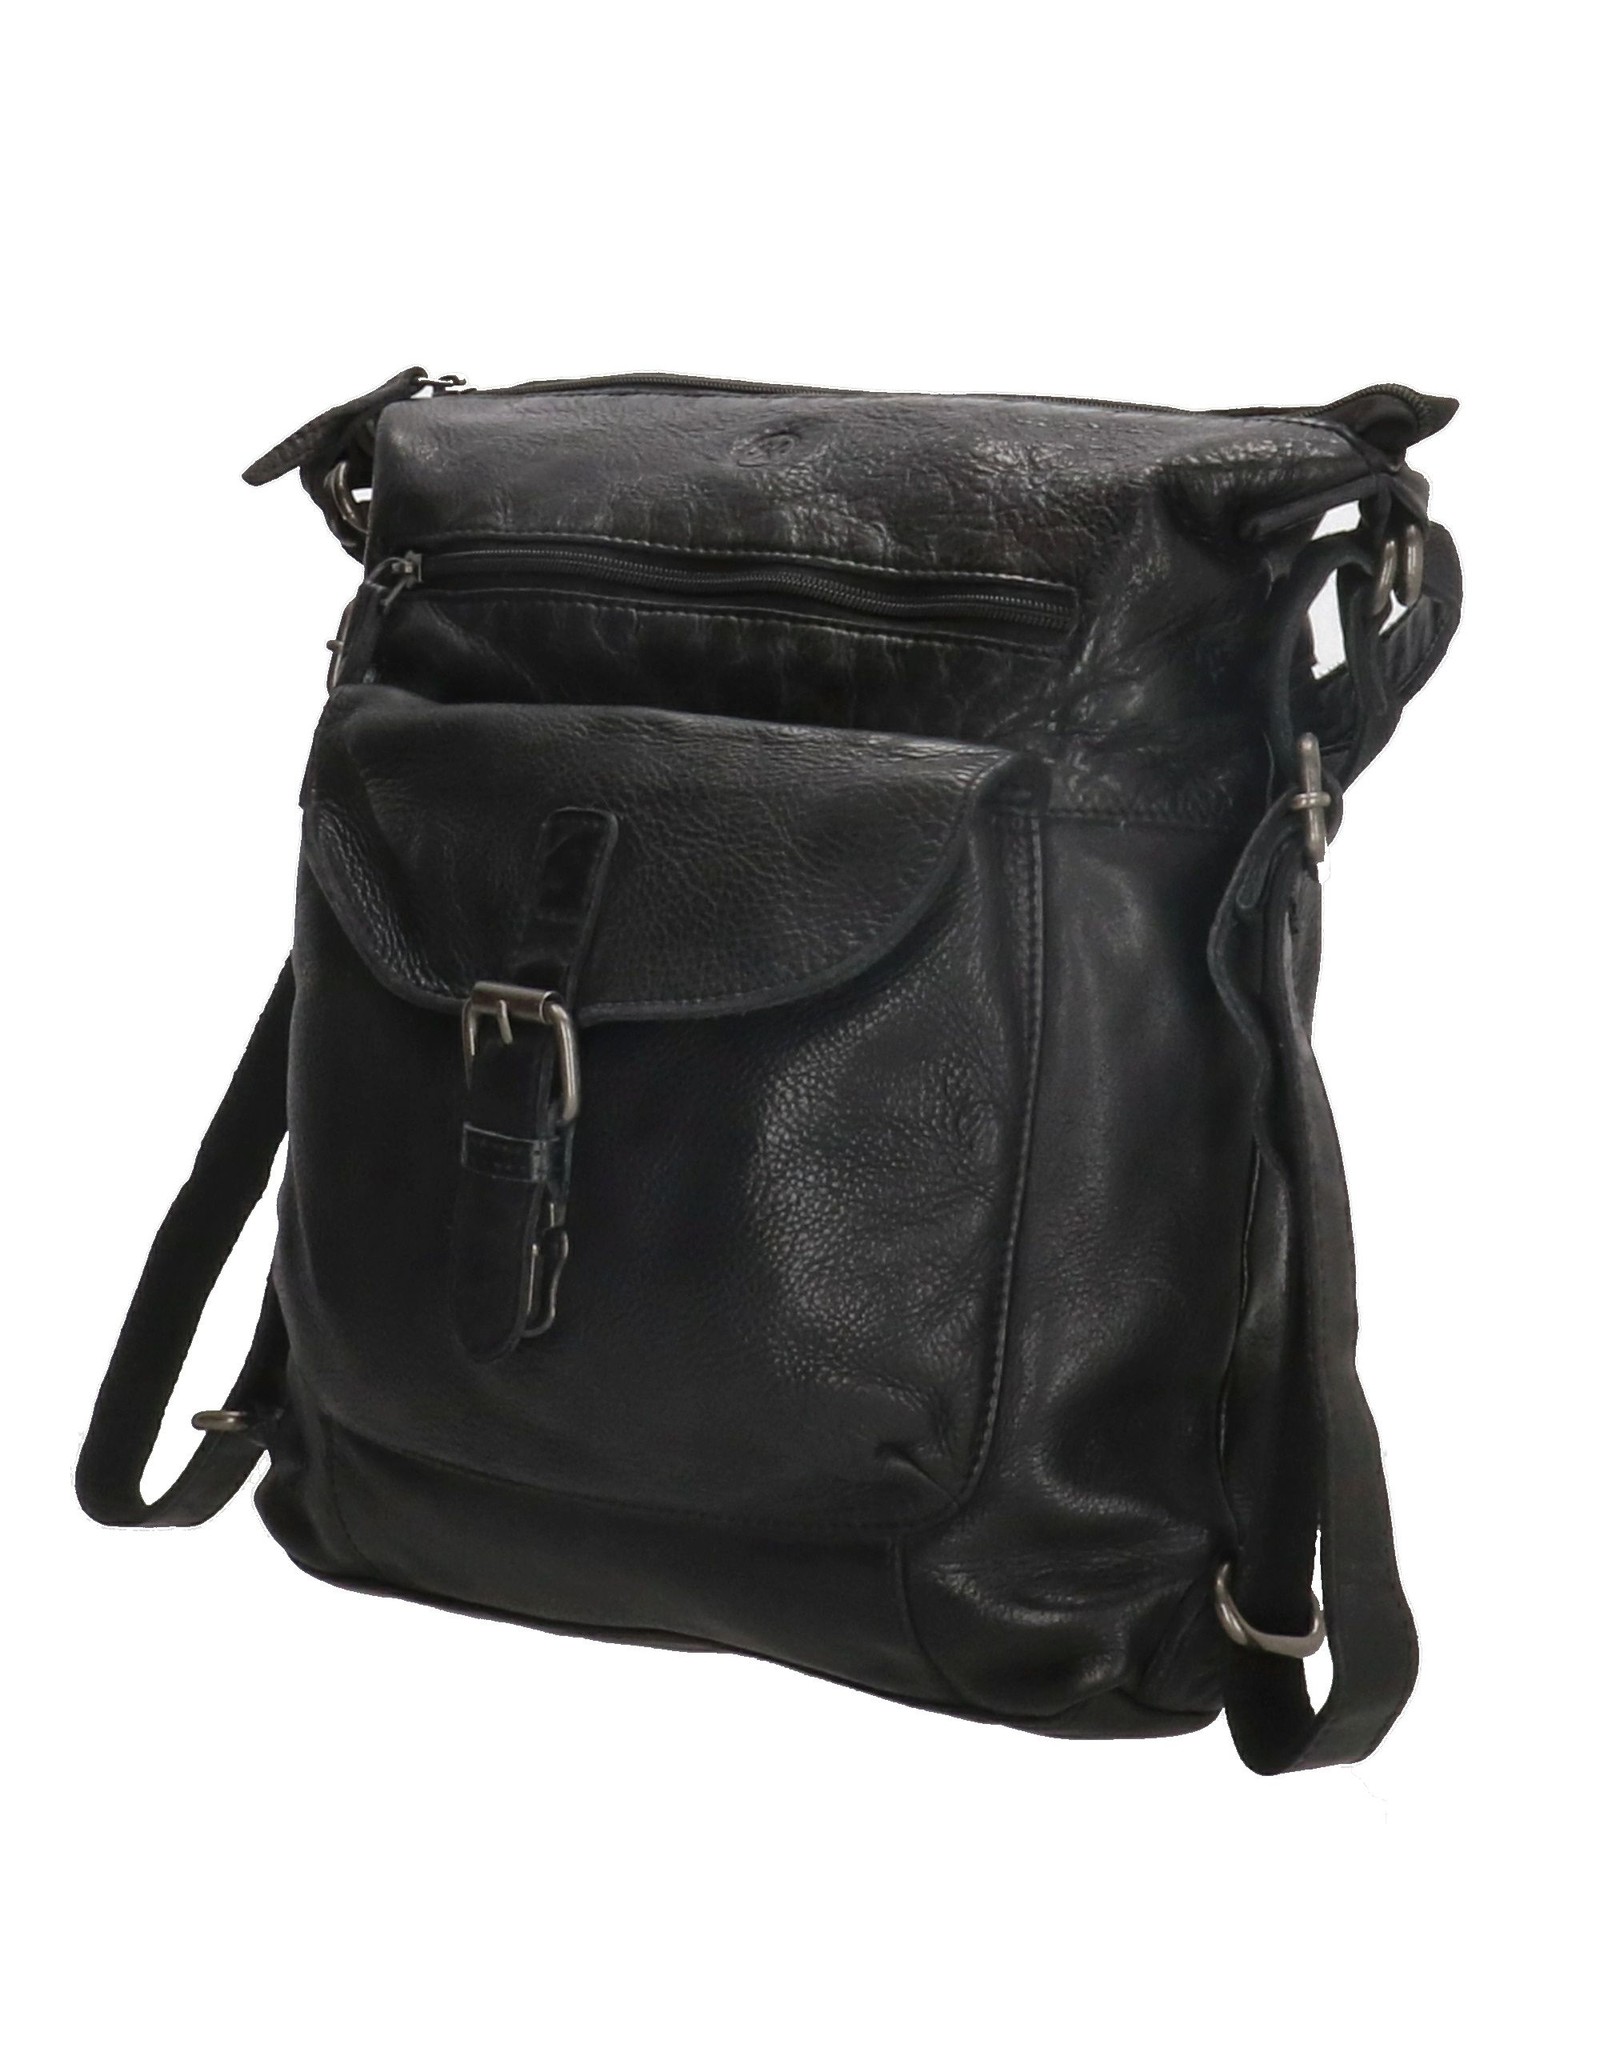 Hide & Stitches Leather backpacks Leather shoppers - Hide & Stitches Paint Rock Backpack - Shoulder bag black